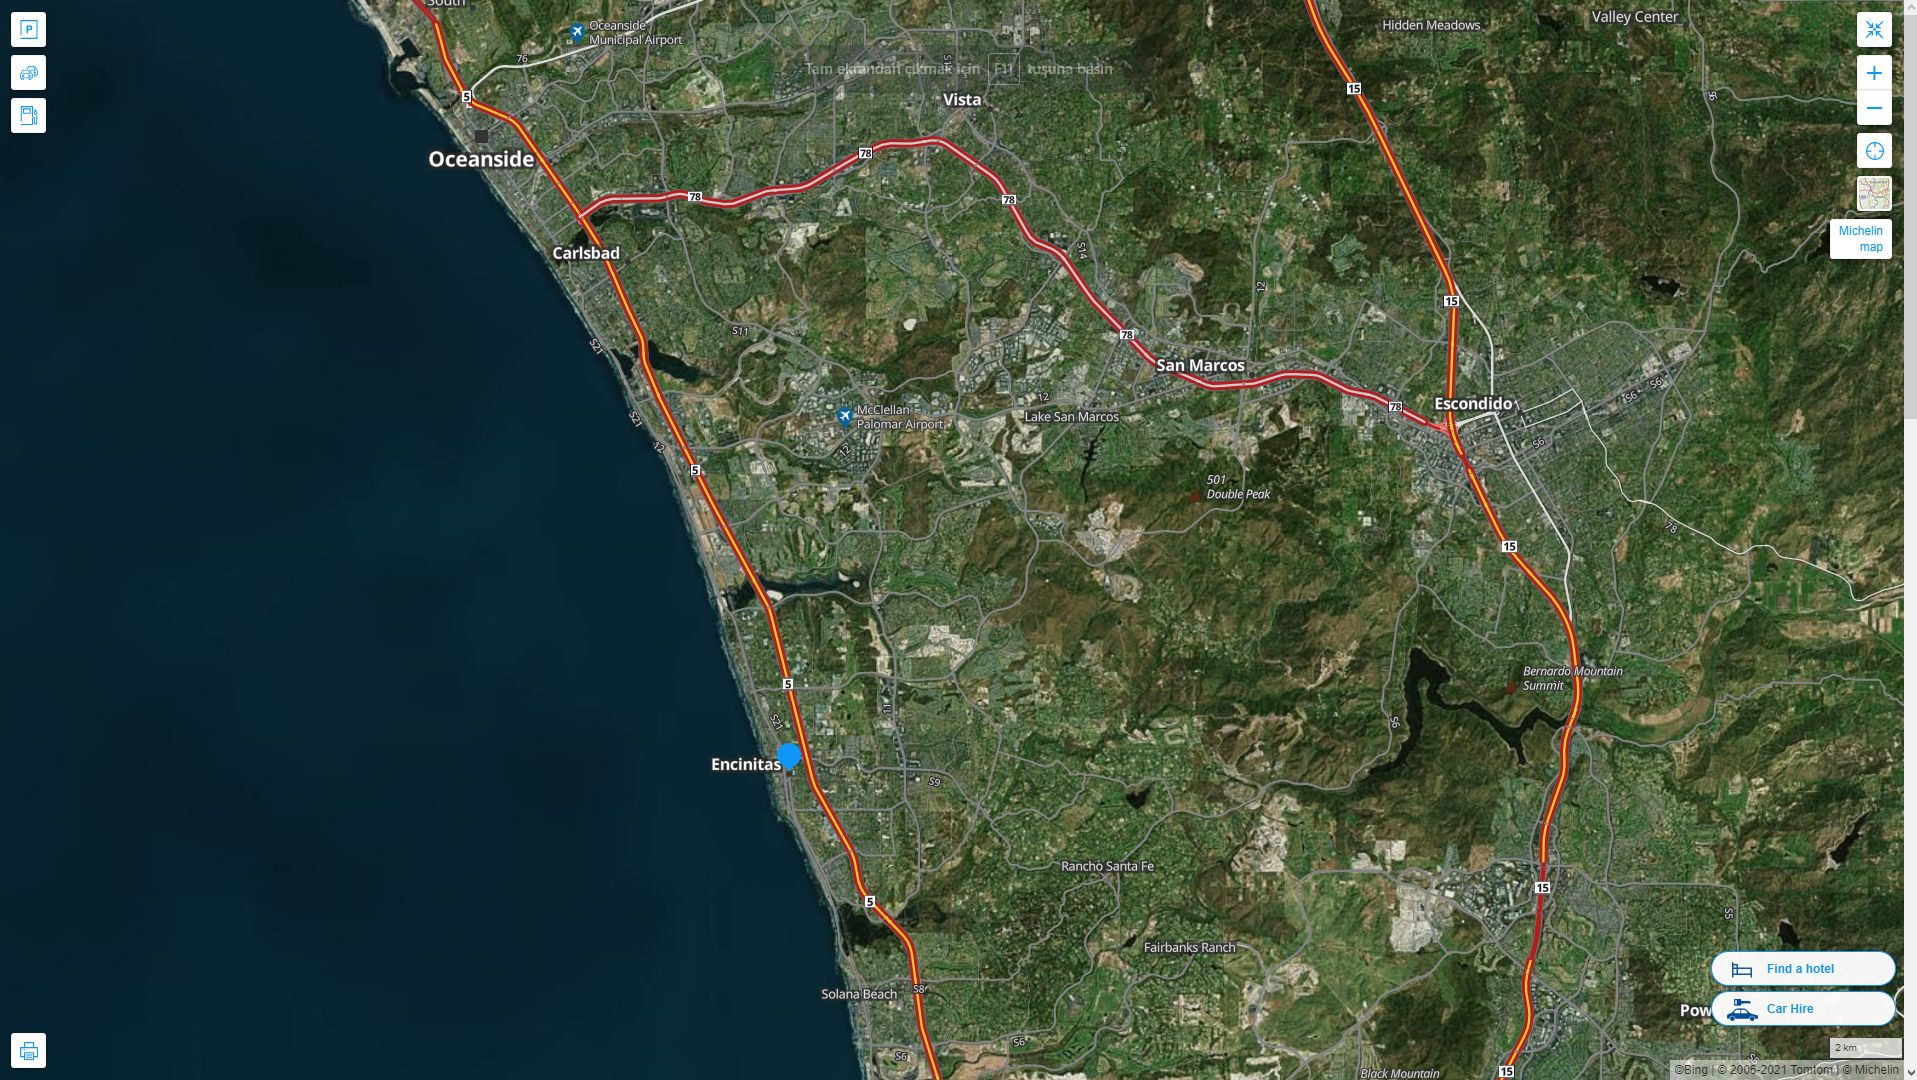 Encinitas California Highway and Road Map with Satellite View